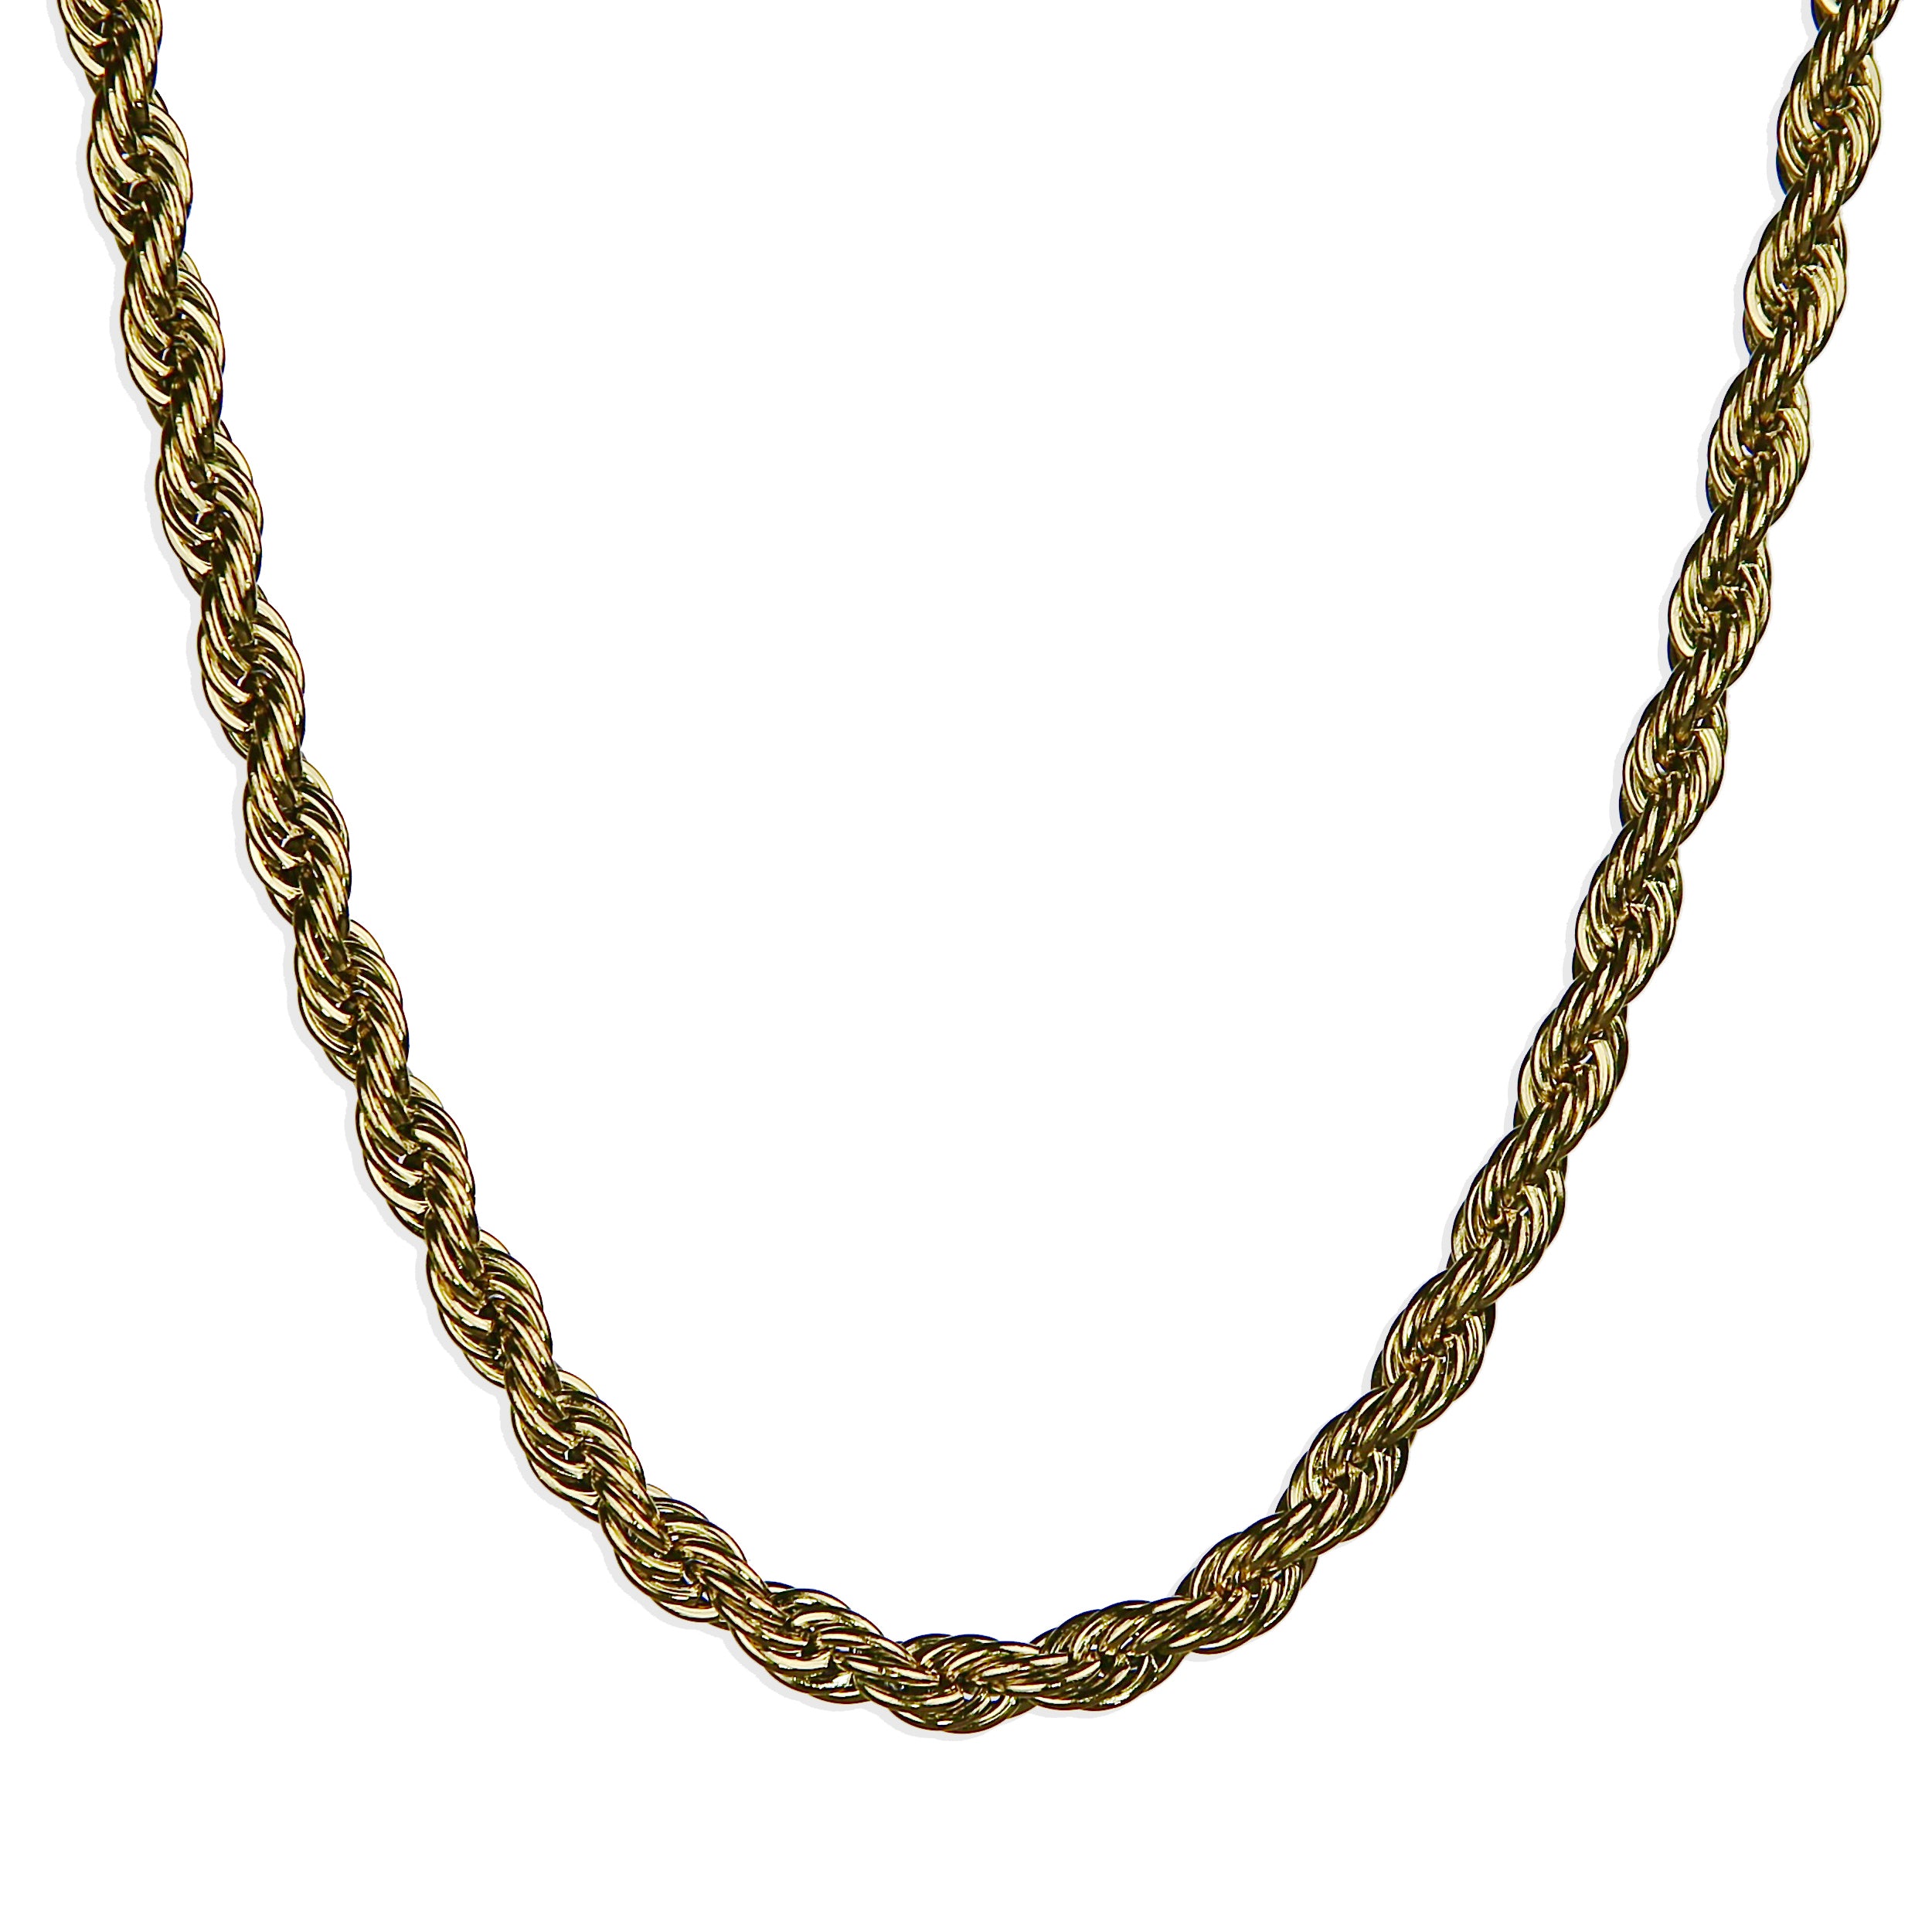 Rope Chain Necklace - Gold 4mm